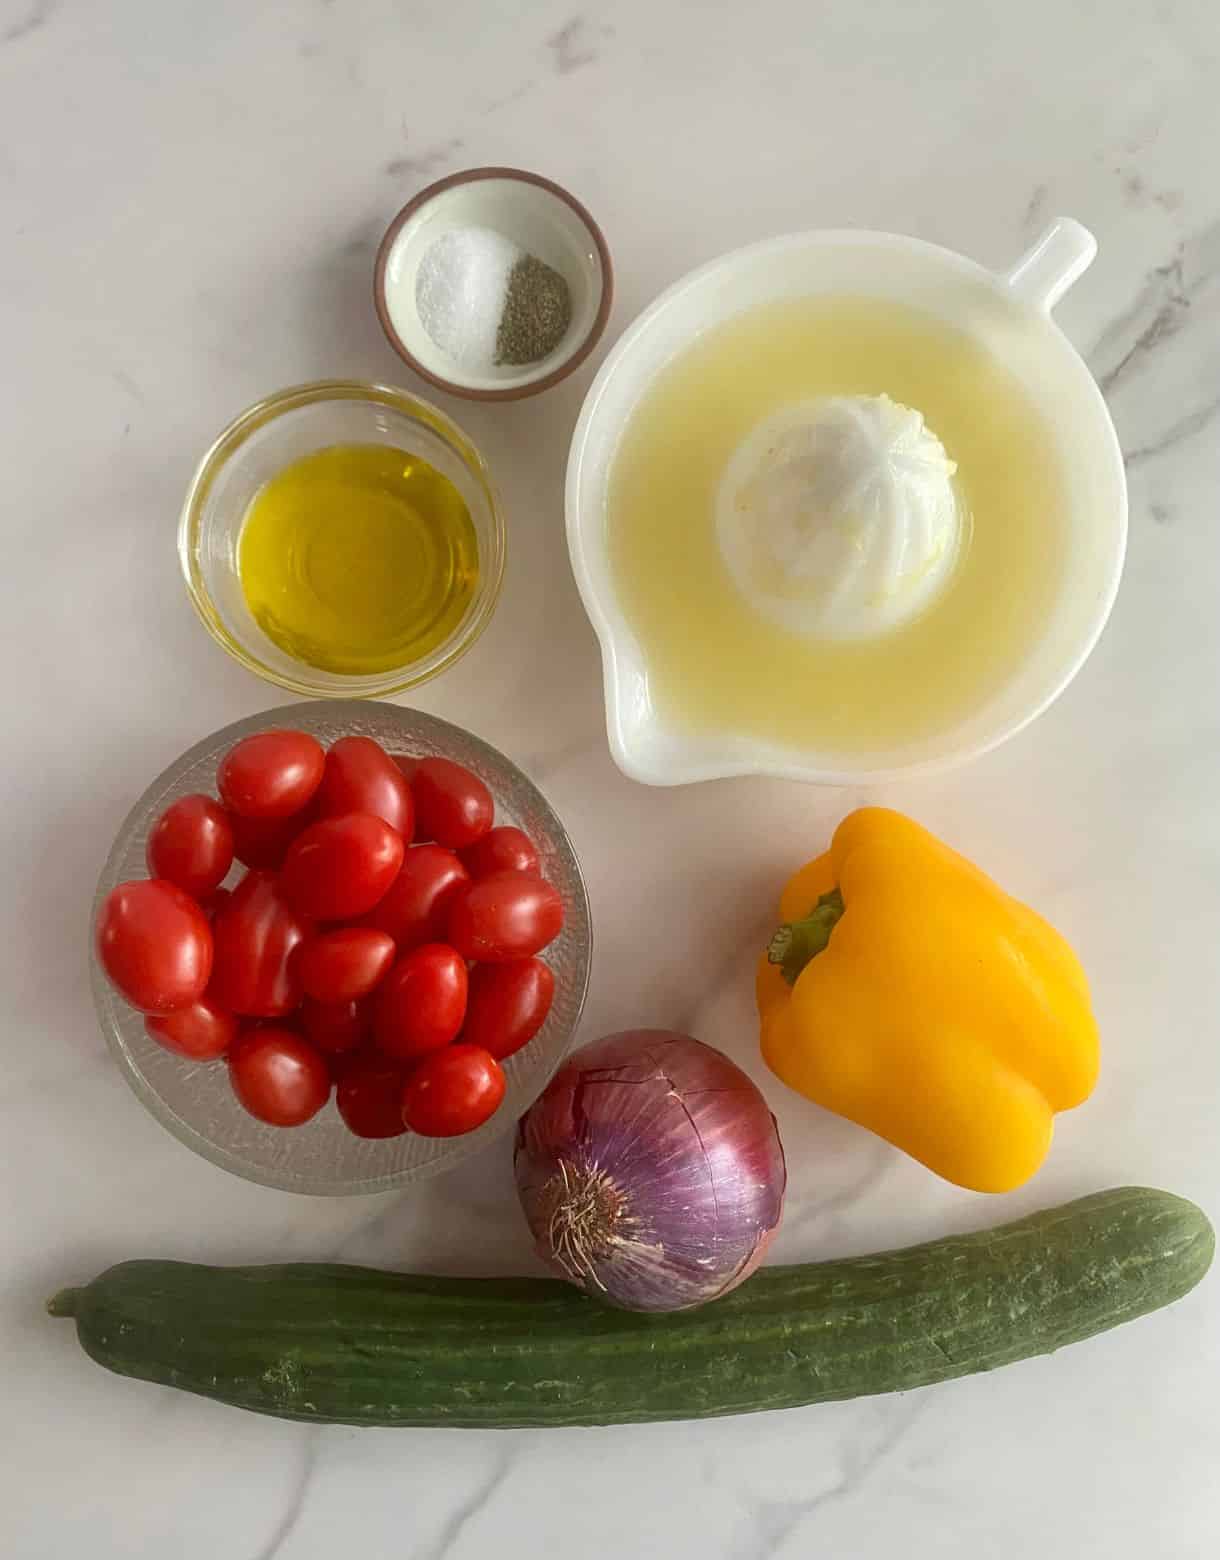 Ingredients for Mediterranean Chopped Salad. A cucumber, red onion, bell pepper, grape tomatoes, lemon juice, olive oil, salt and pepper.